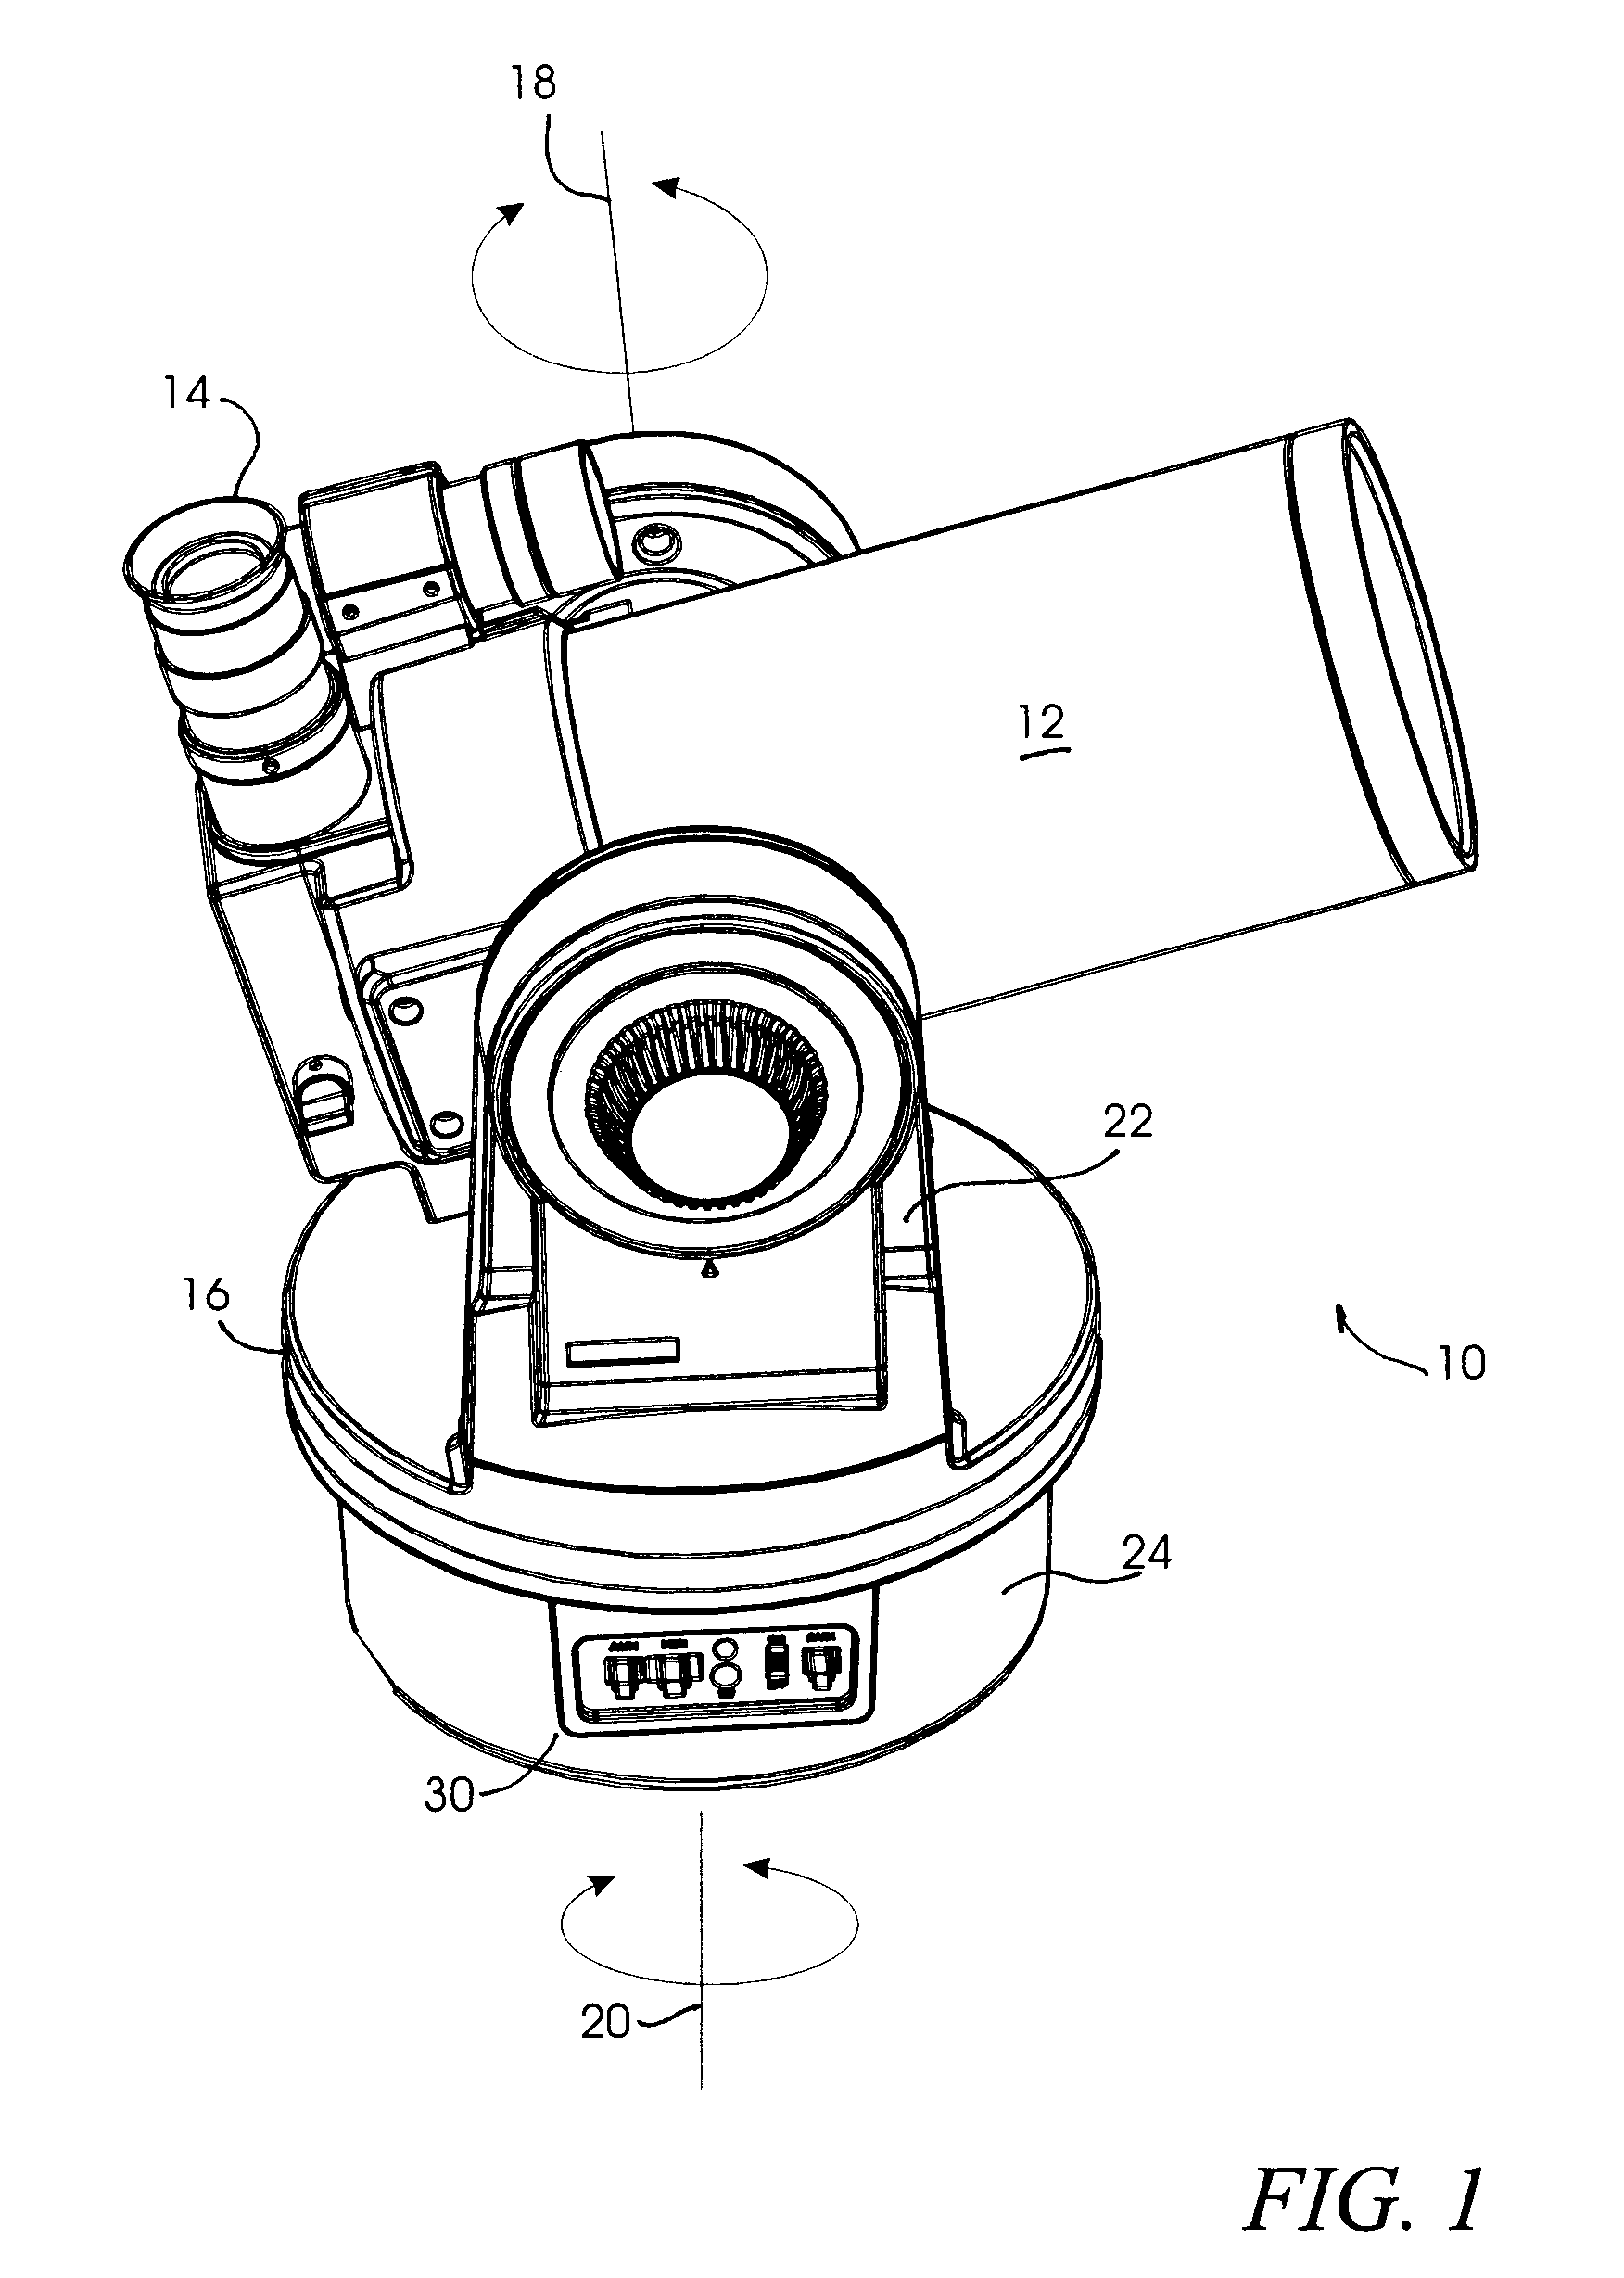 Systems and methods for automated telescope alignment and orientation